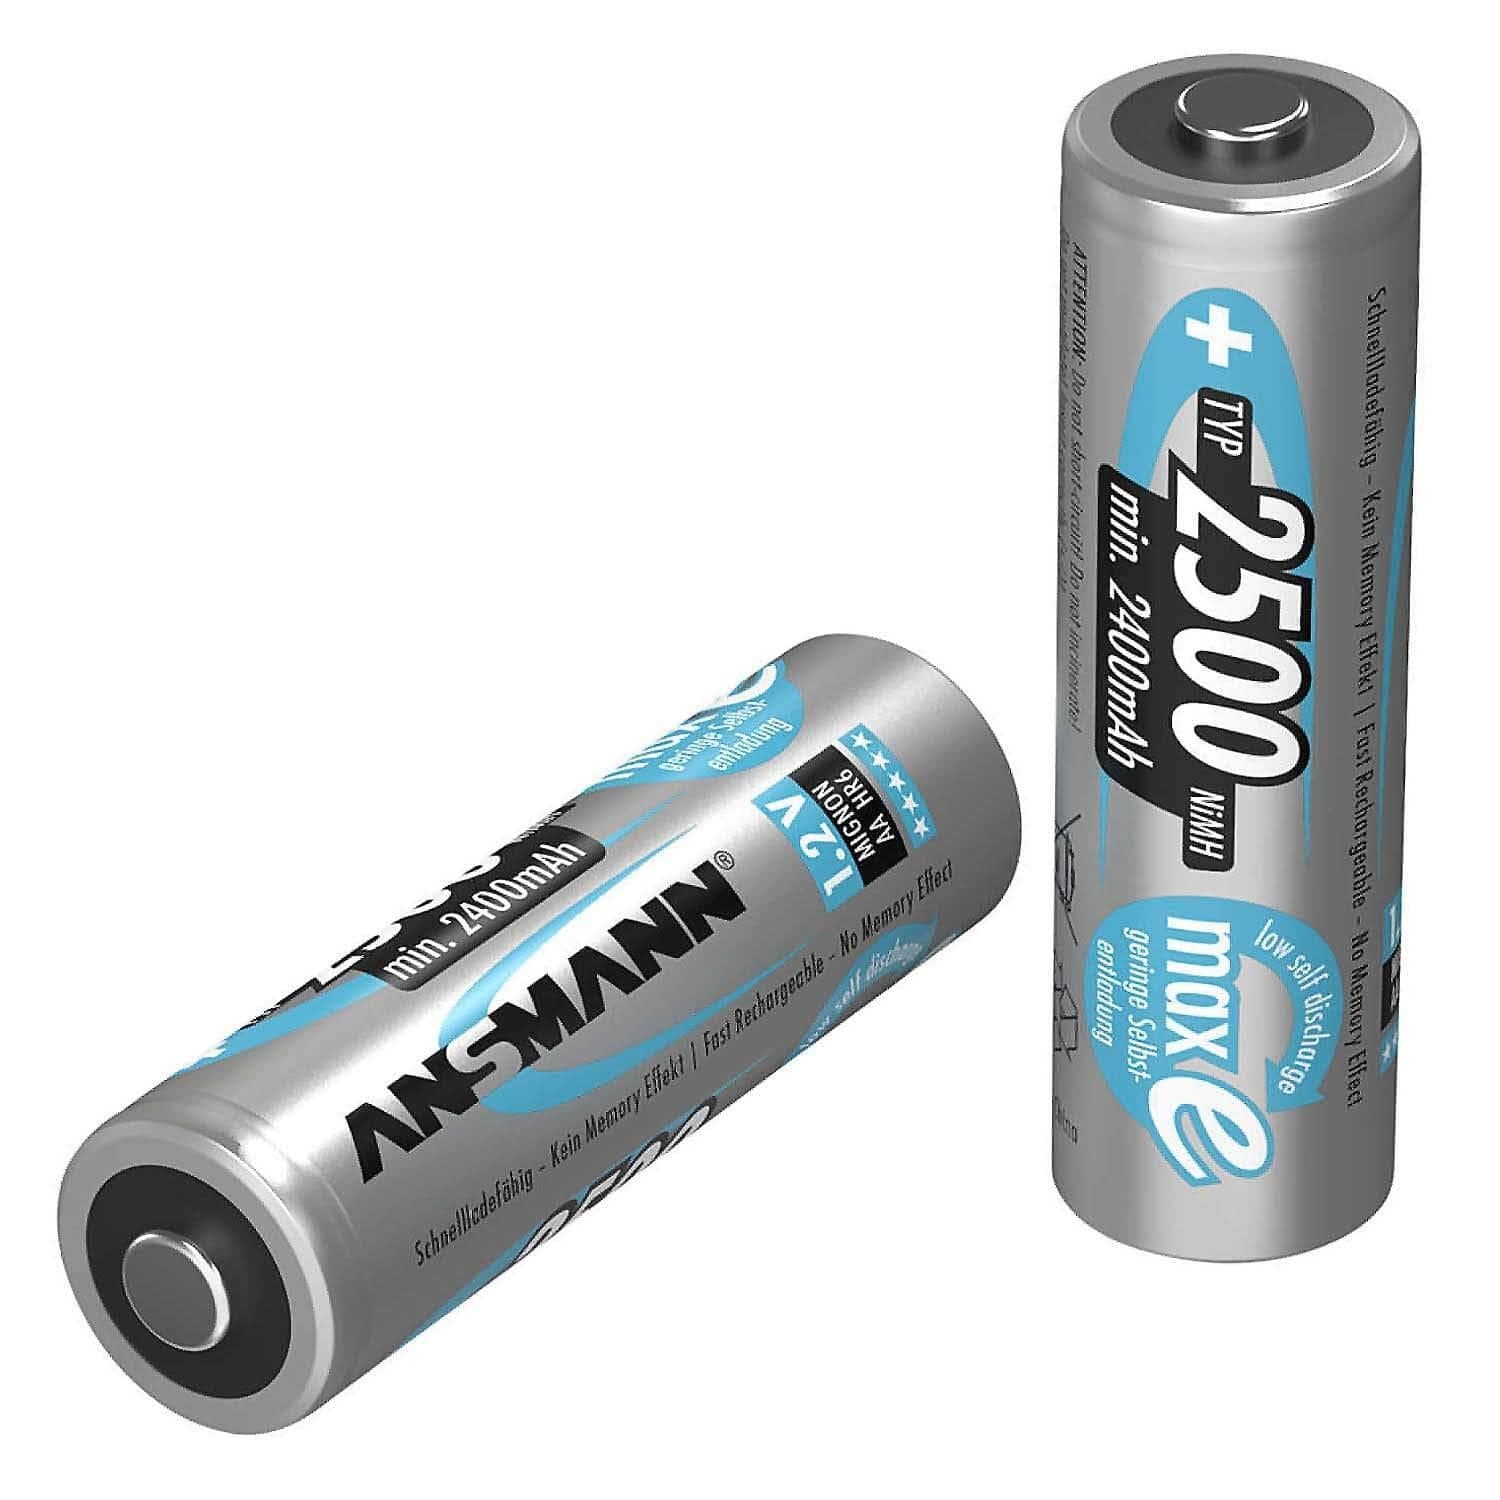 2500mAh NiMH Rechargeable AA Batteries (2-Pack) - The Pi Hut